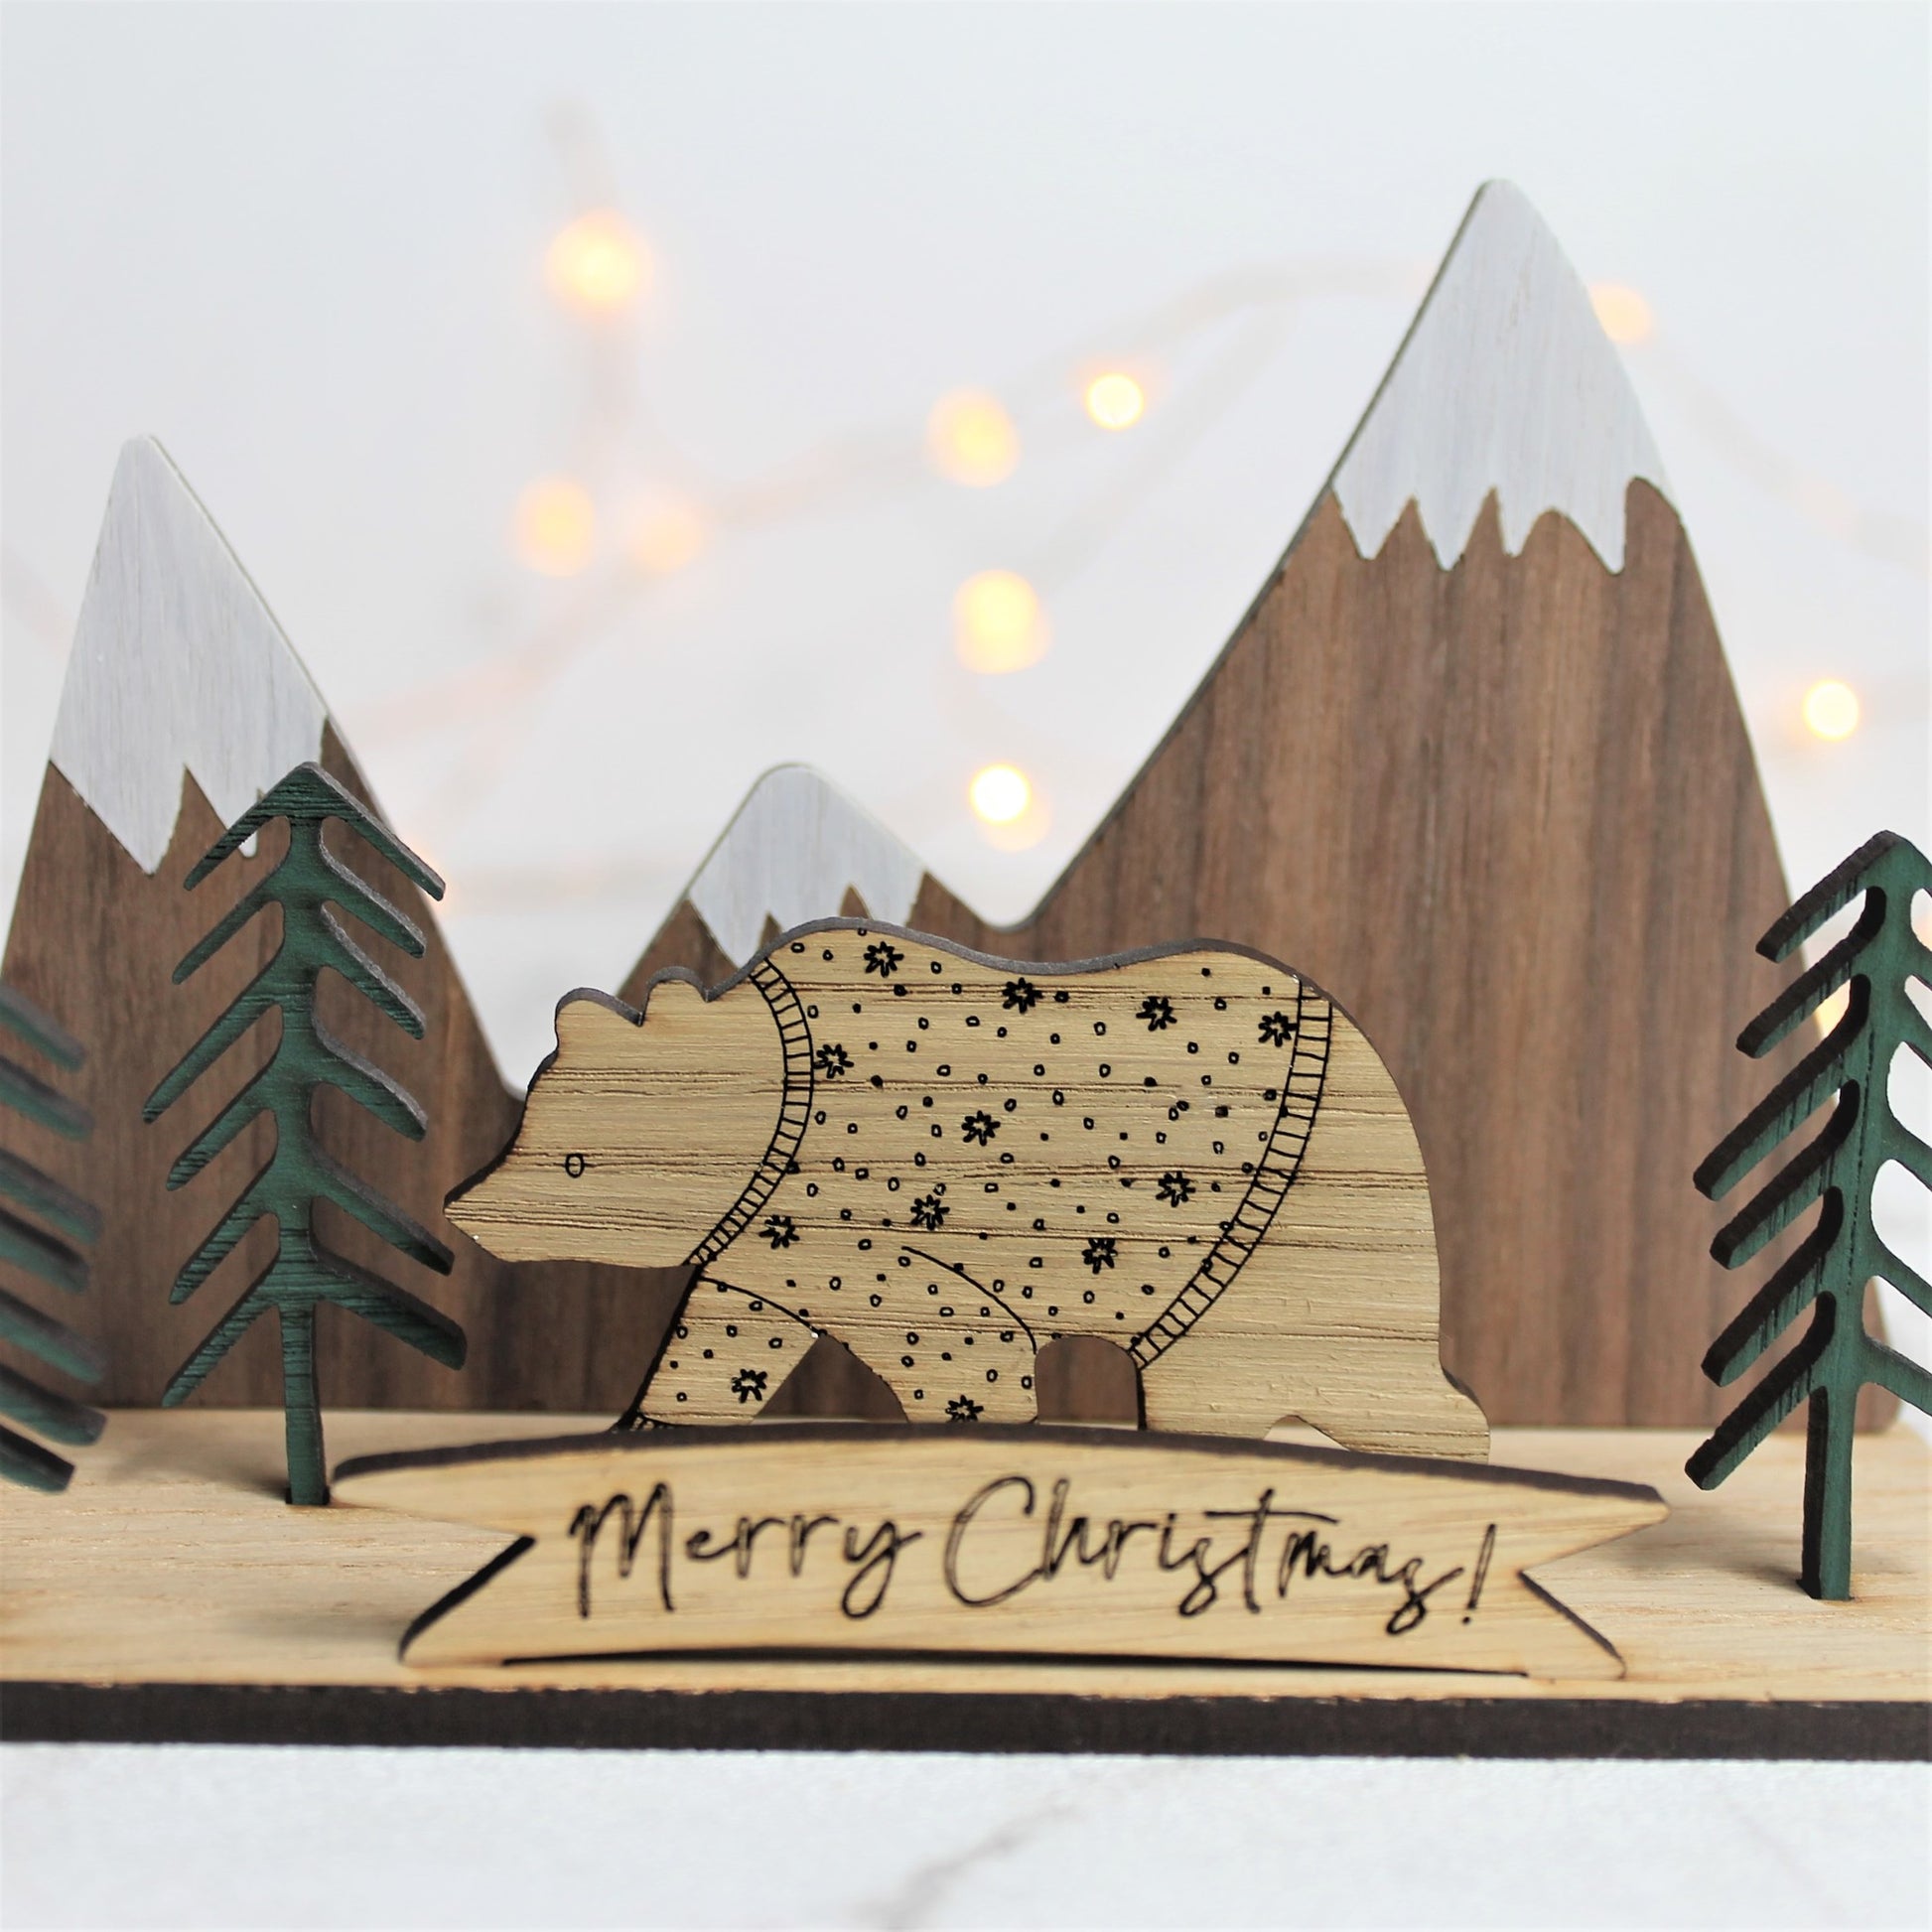 3d wooden ornament with mountain and forest scene, and a festive jumper bear